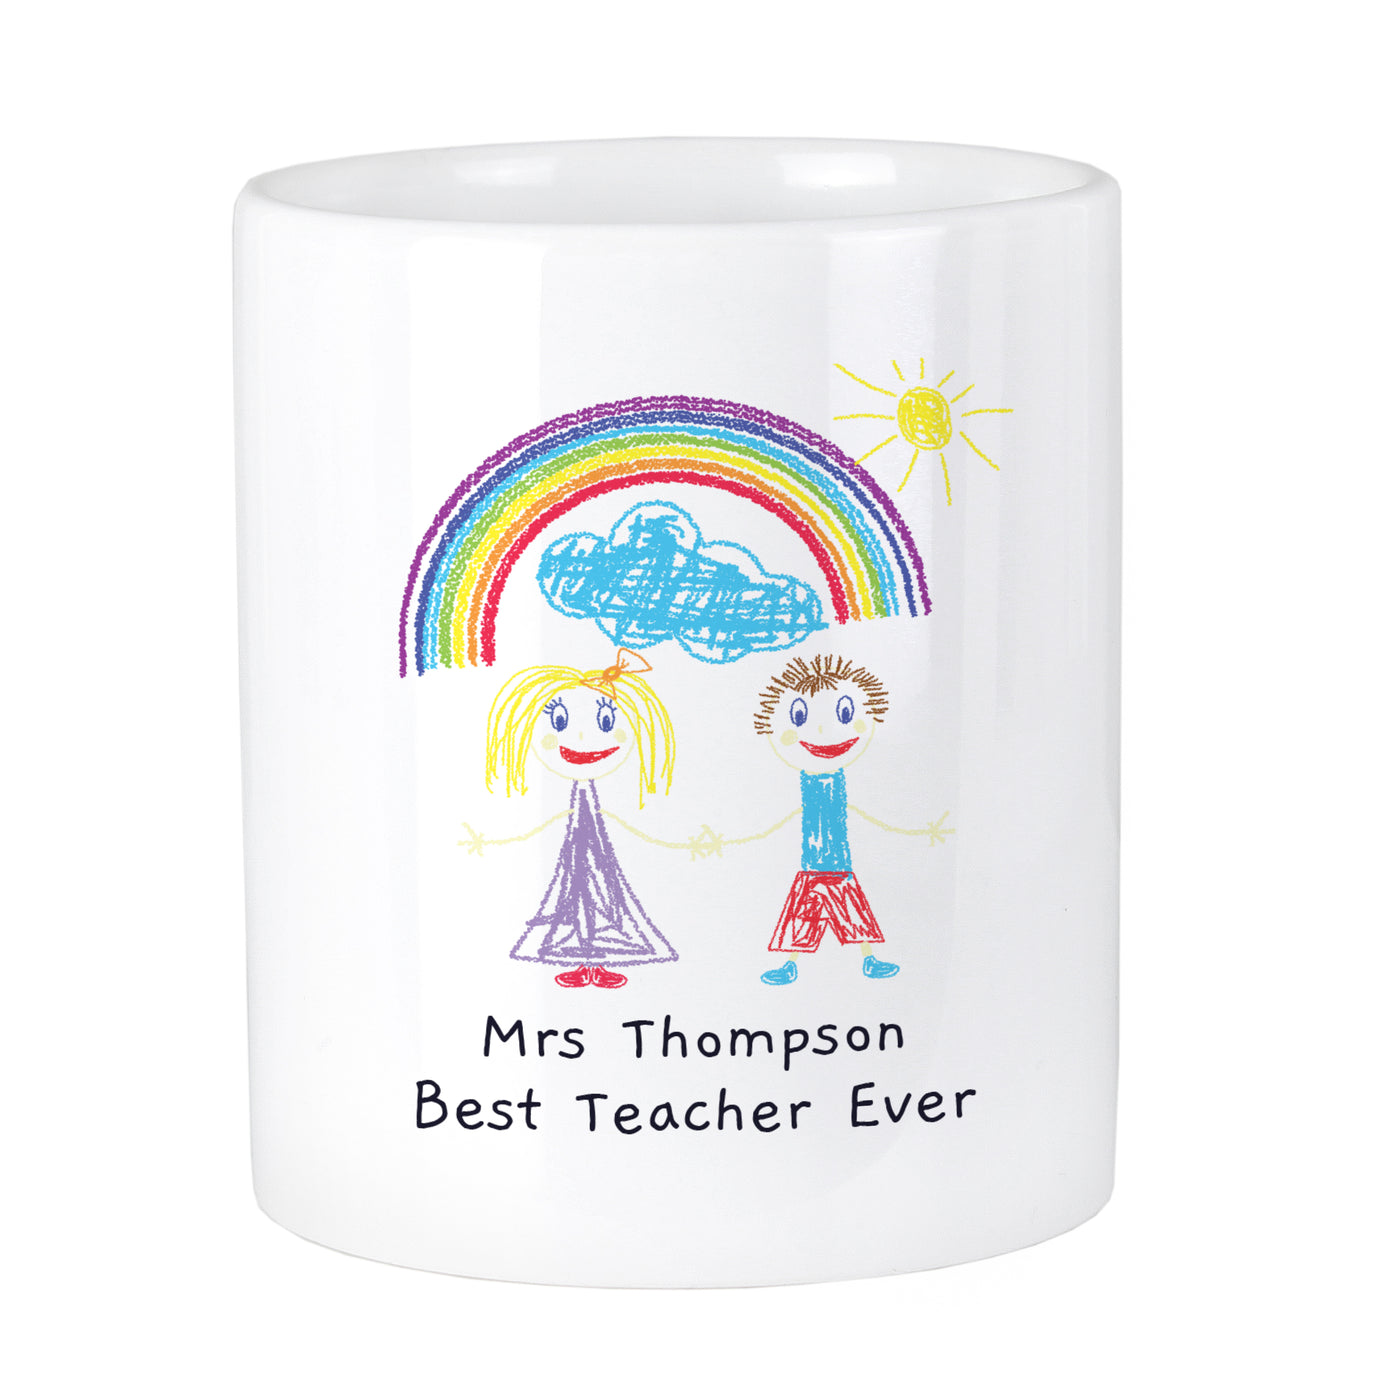 Personalised Childrens Drawing Photo Storage Pot